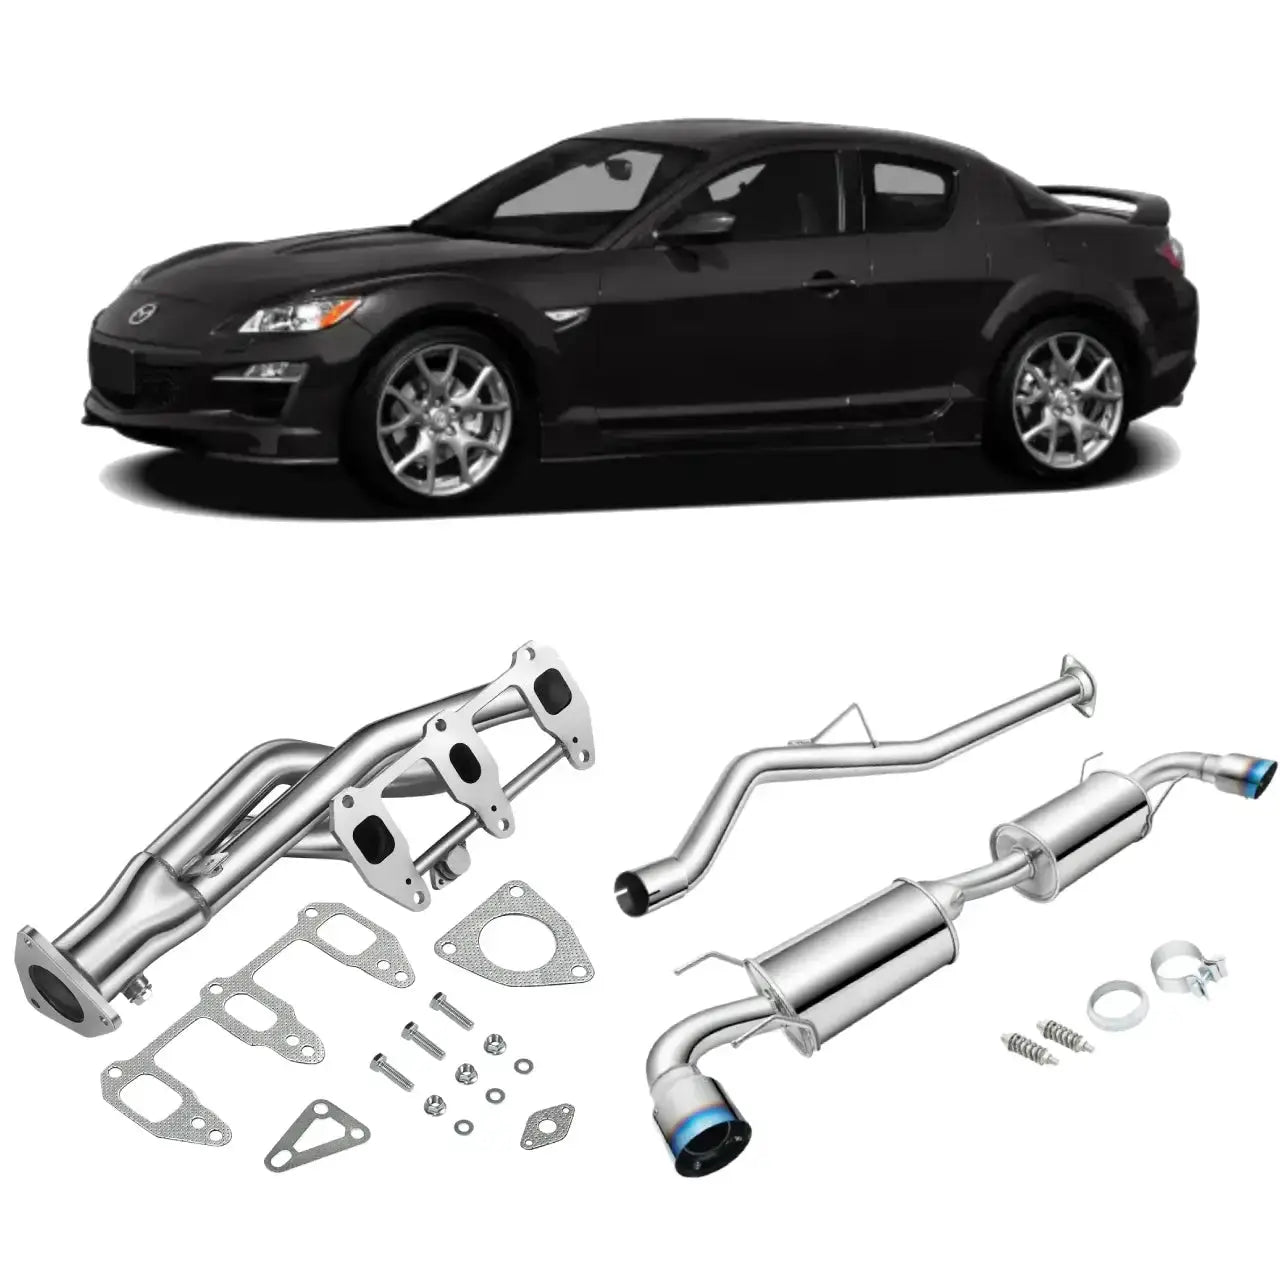 Exhaust Header/Catback Exhaust System w/ Dual Burnt Tip All-In-One Kit for 2004-2008 Mazda RX-8 1.3L Flashark